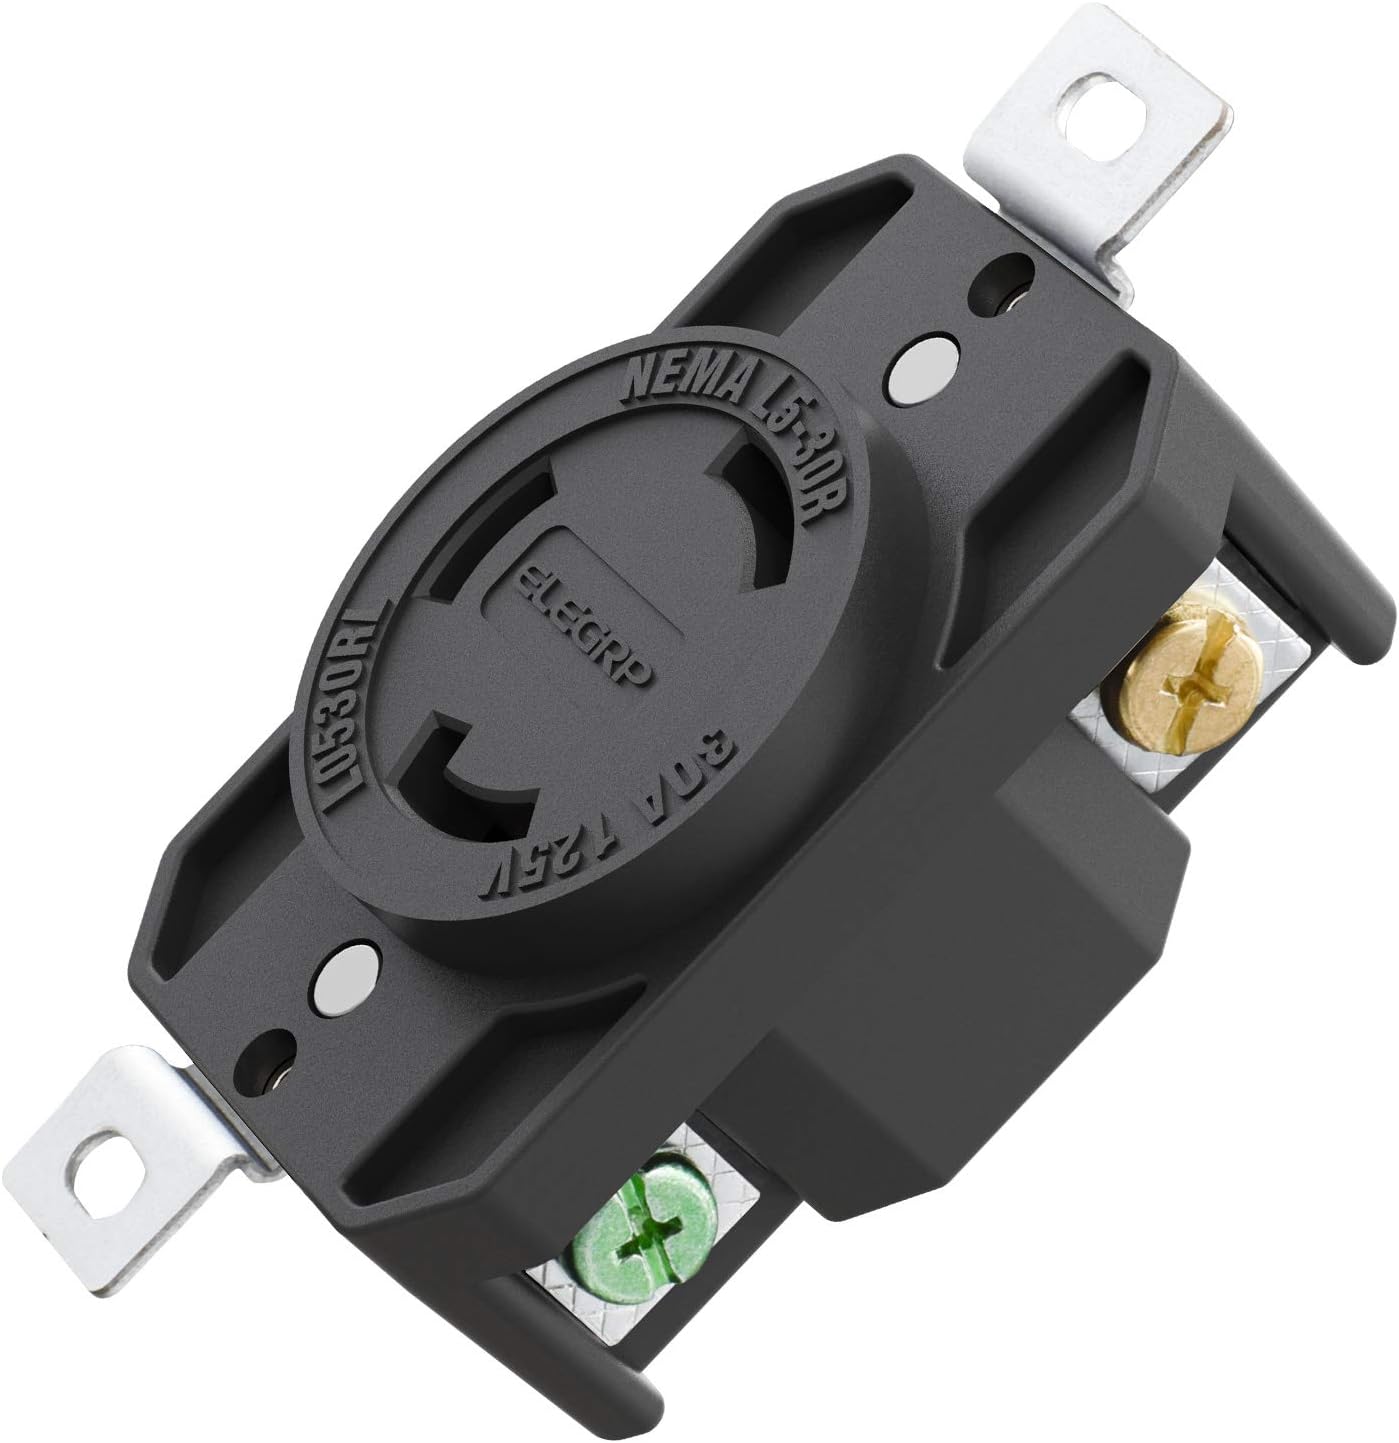 ELEGRP Twist Lock Adapter Male Plug & Connector Nema L5-30P and L5-30R 2 Pole 3 Wire Grounding Receptacle 30A 125V